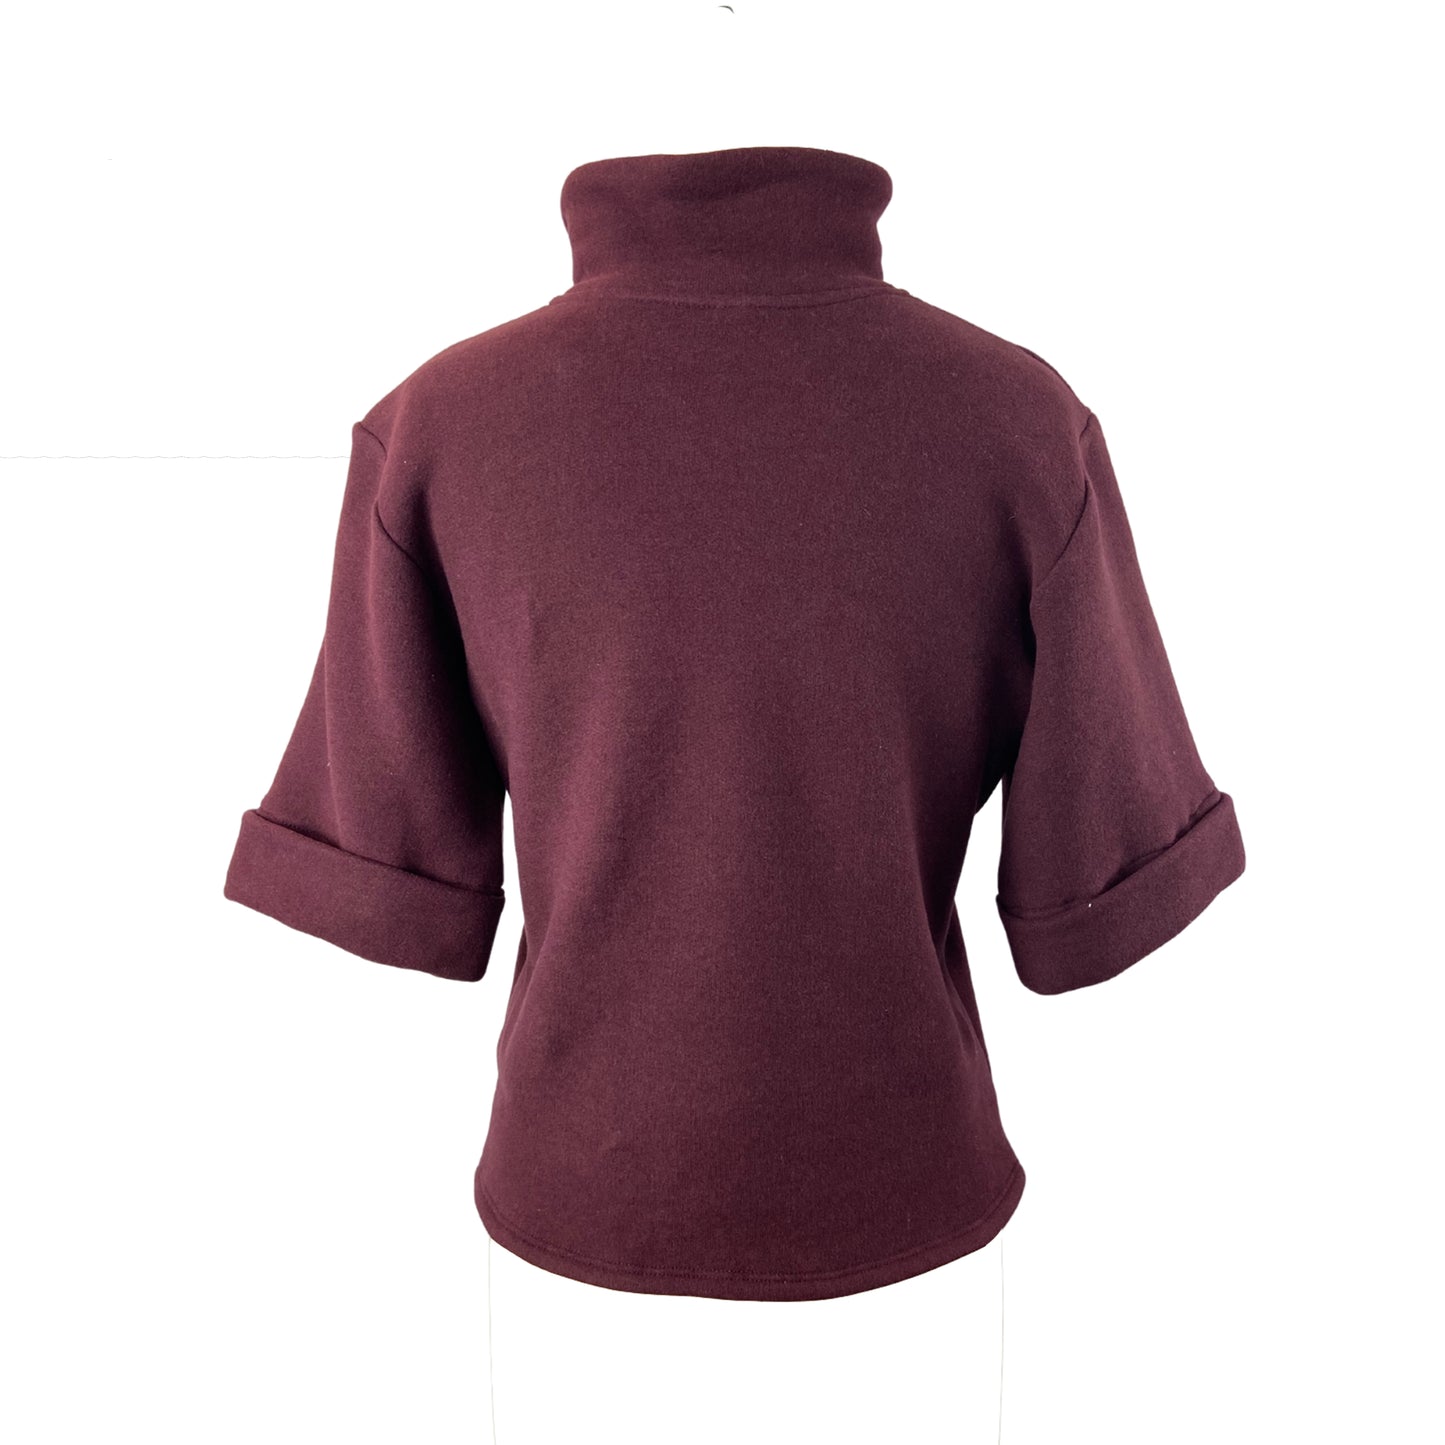 Back of Burgundy sweater with short sleeves and fold over collar